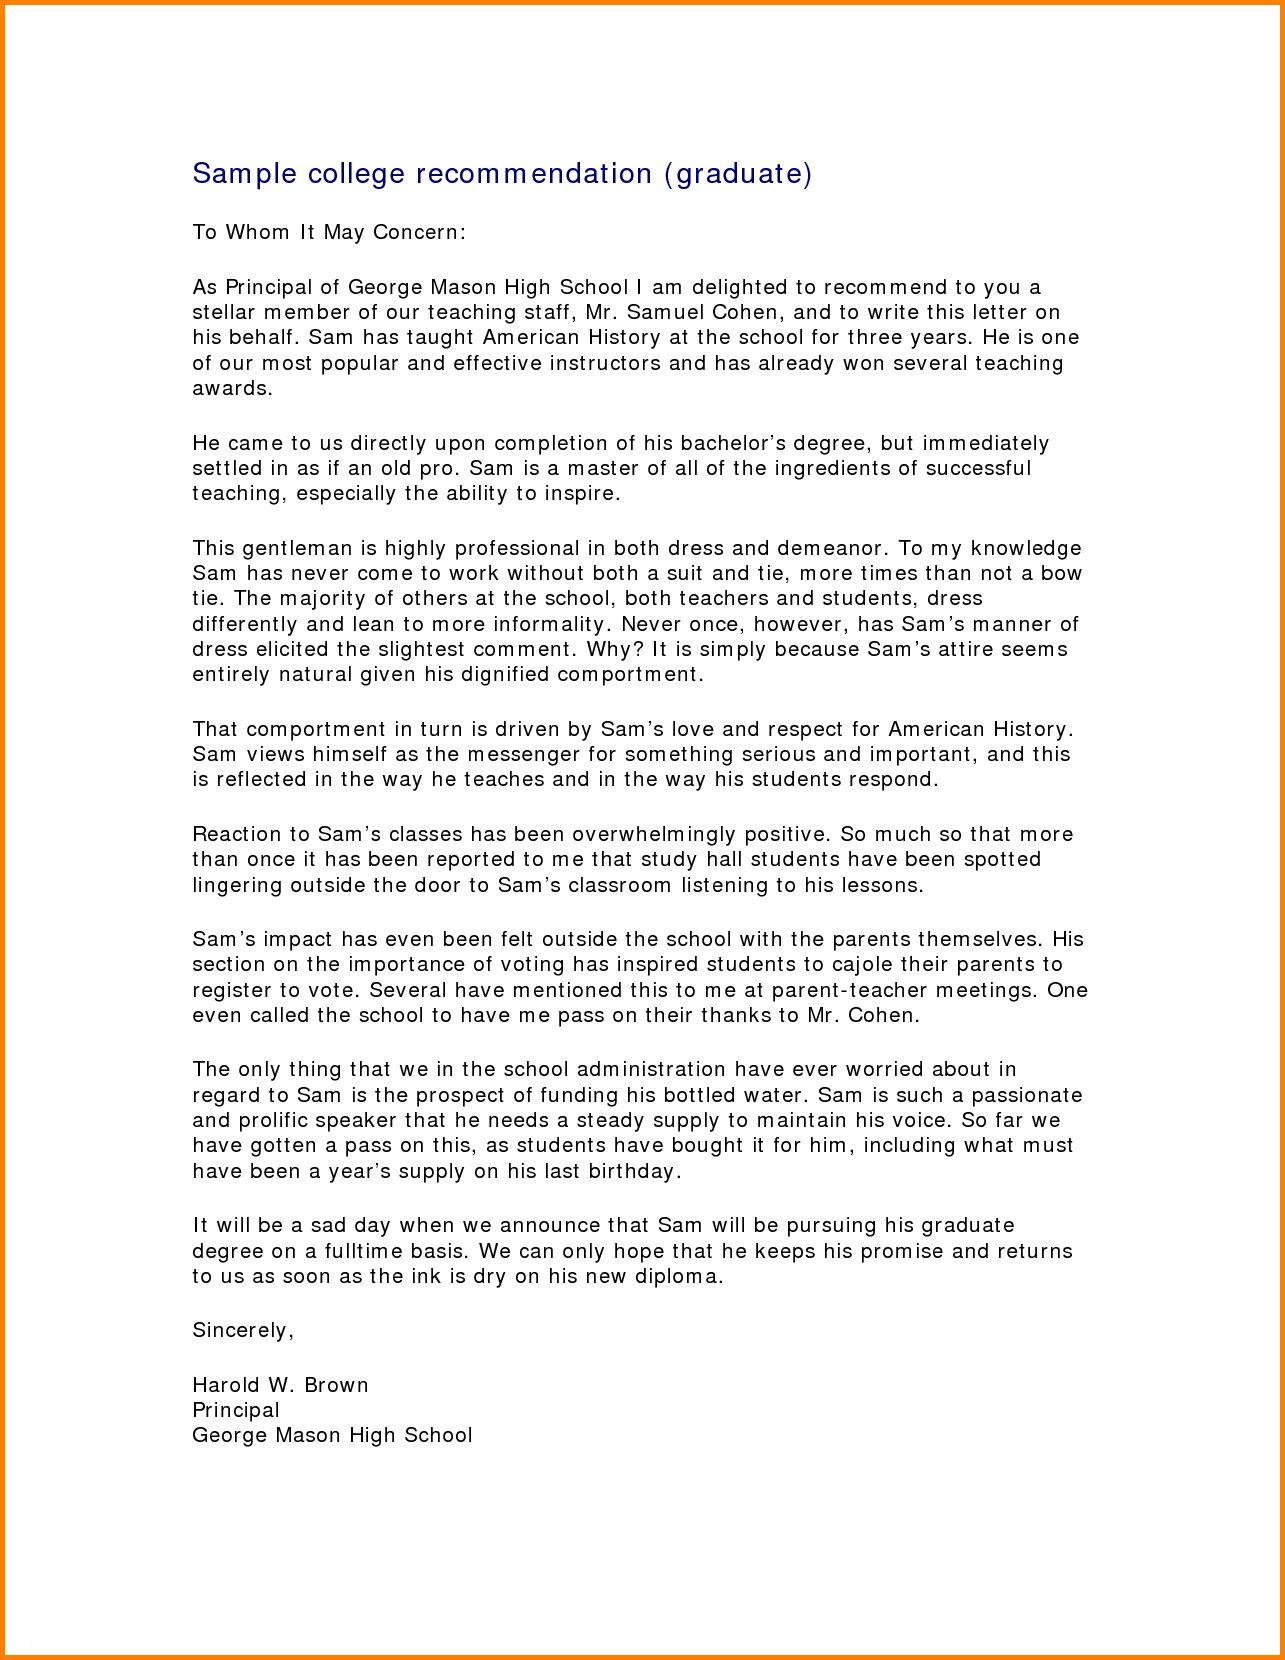 Sample Recommendation Letter Graduate Study inside proportions 1285 X 1660